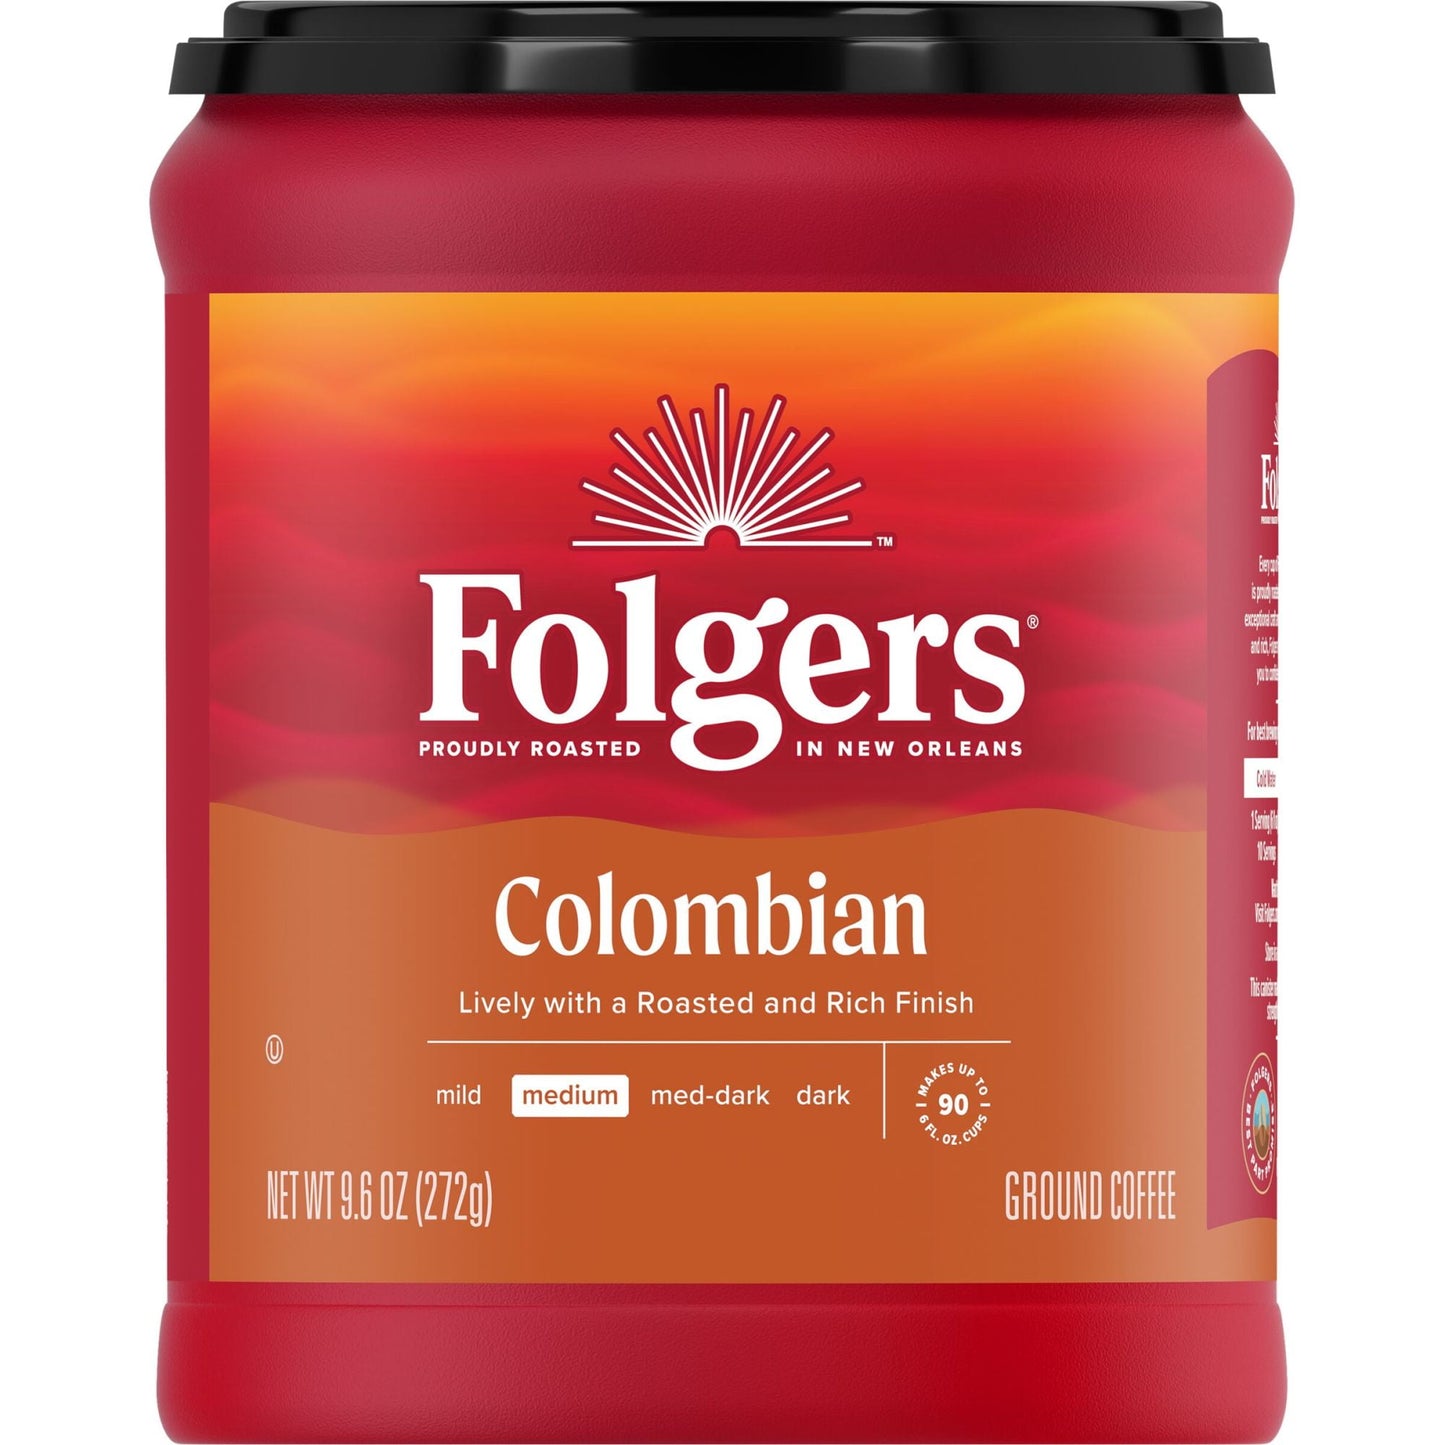 Folgers Colombian Coffee, Medium Roast Ground Coffee, 9.6 Ounce Canister